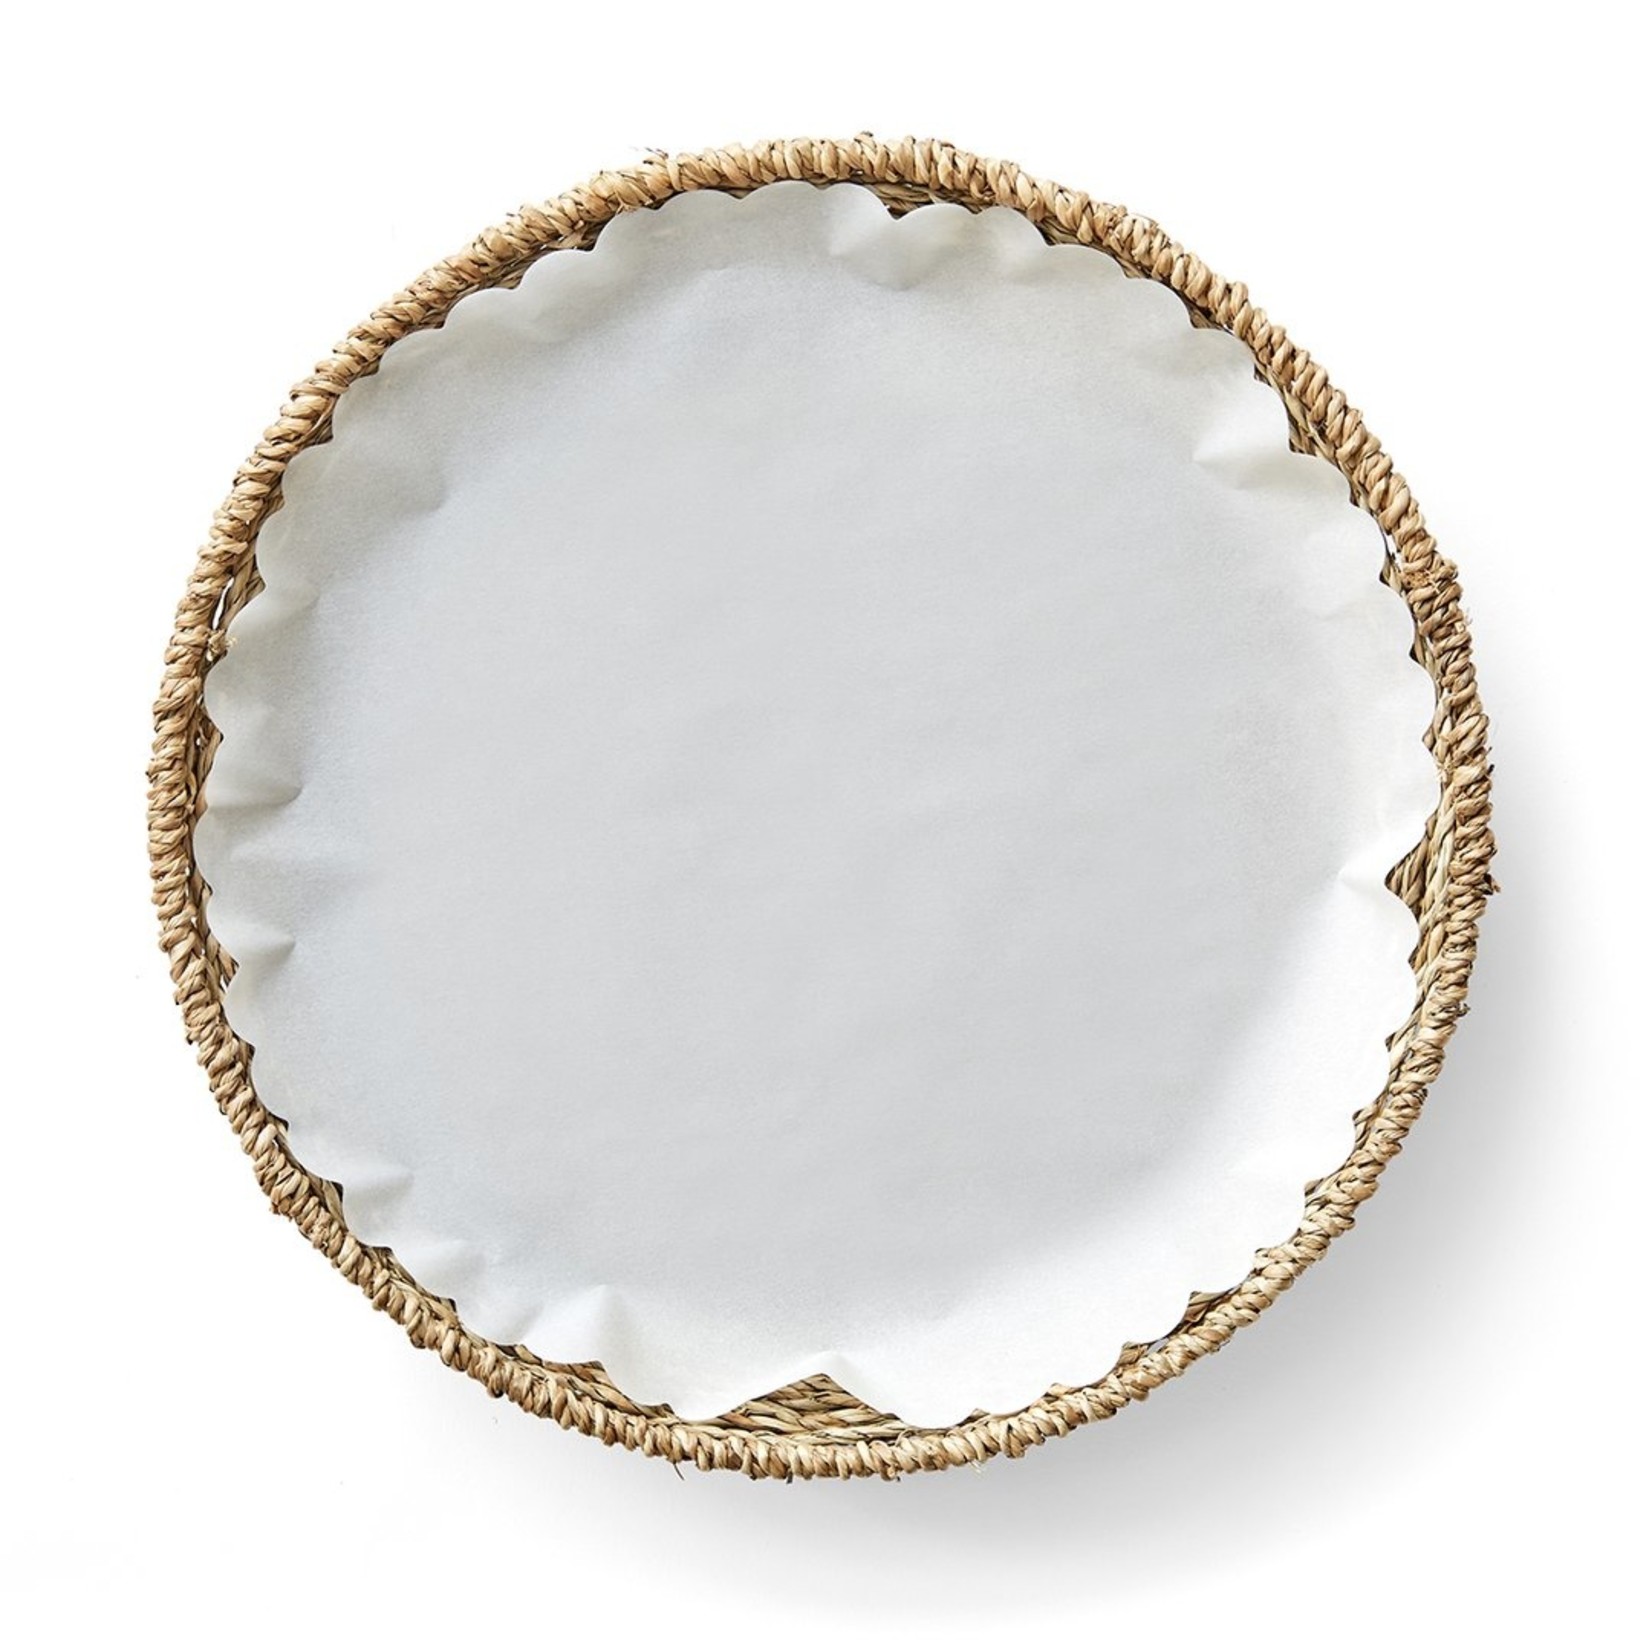 Plate & Pattern Woven Seagrass Plates & Parchment Paper Liners